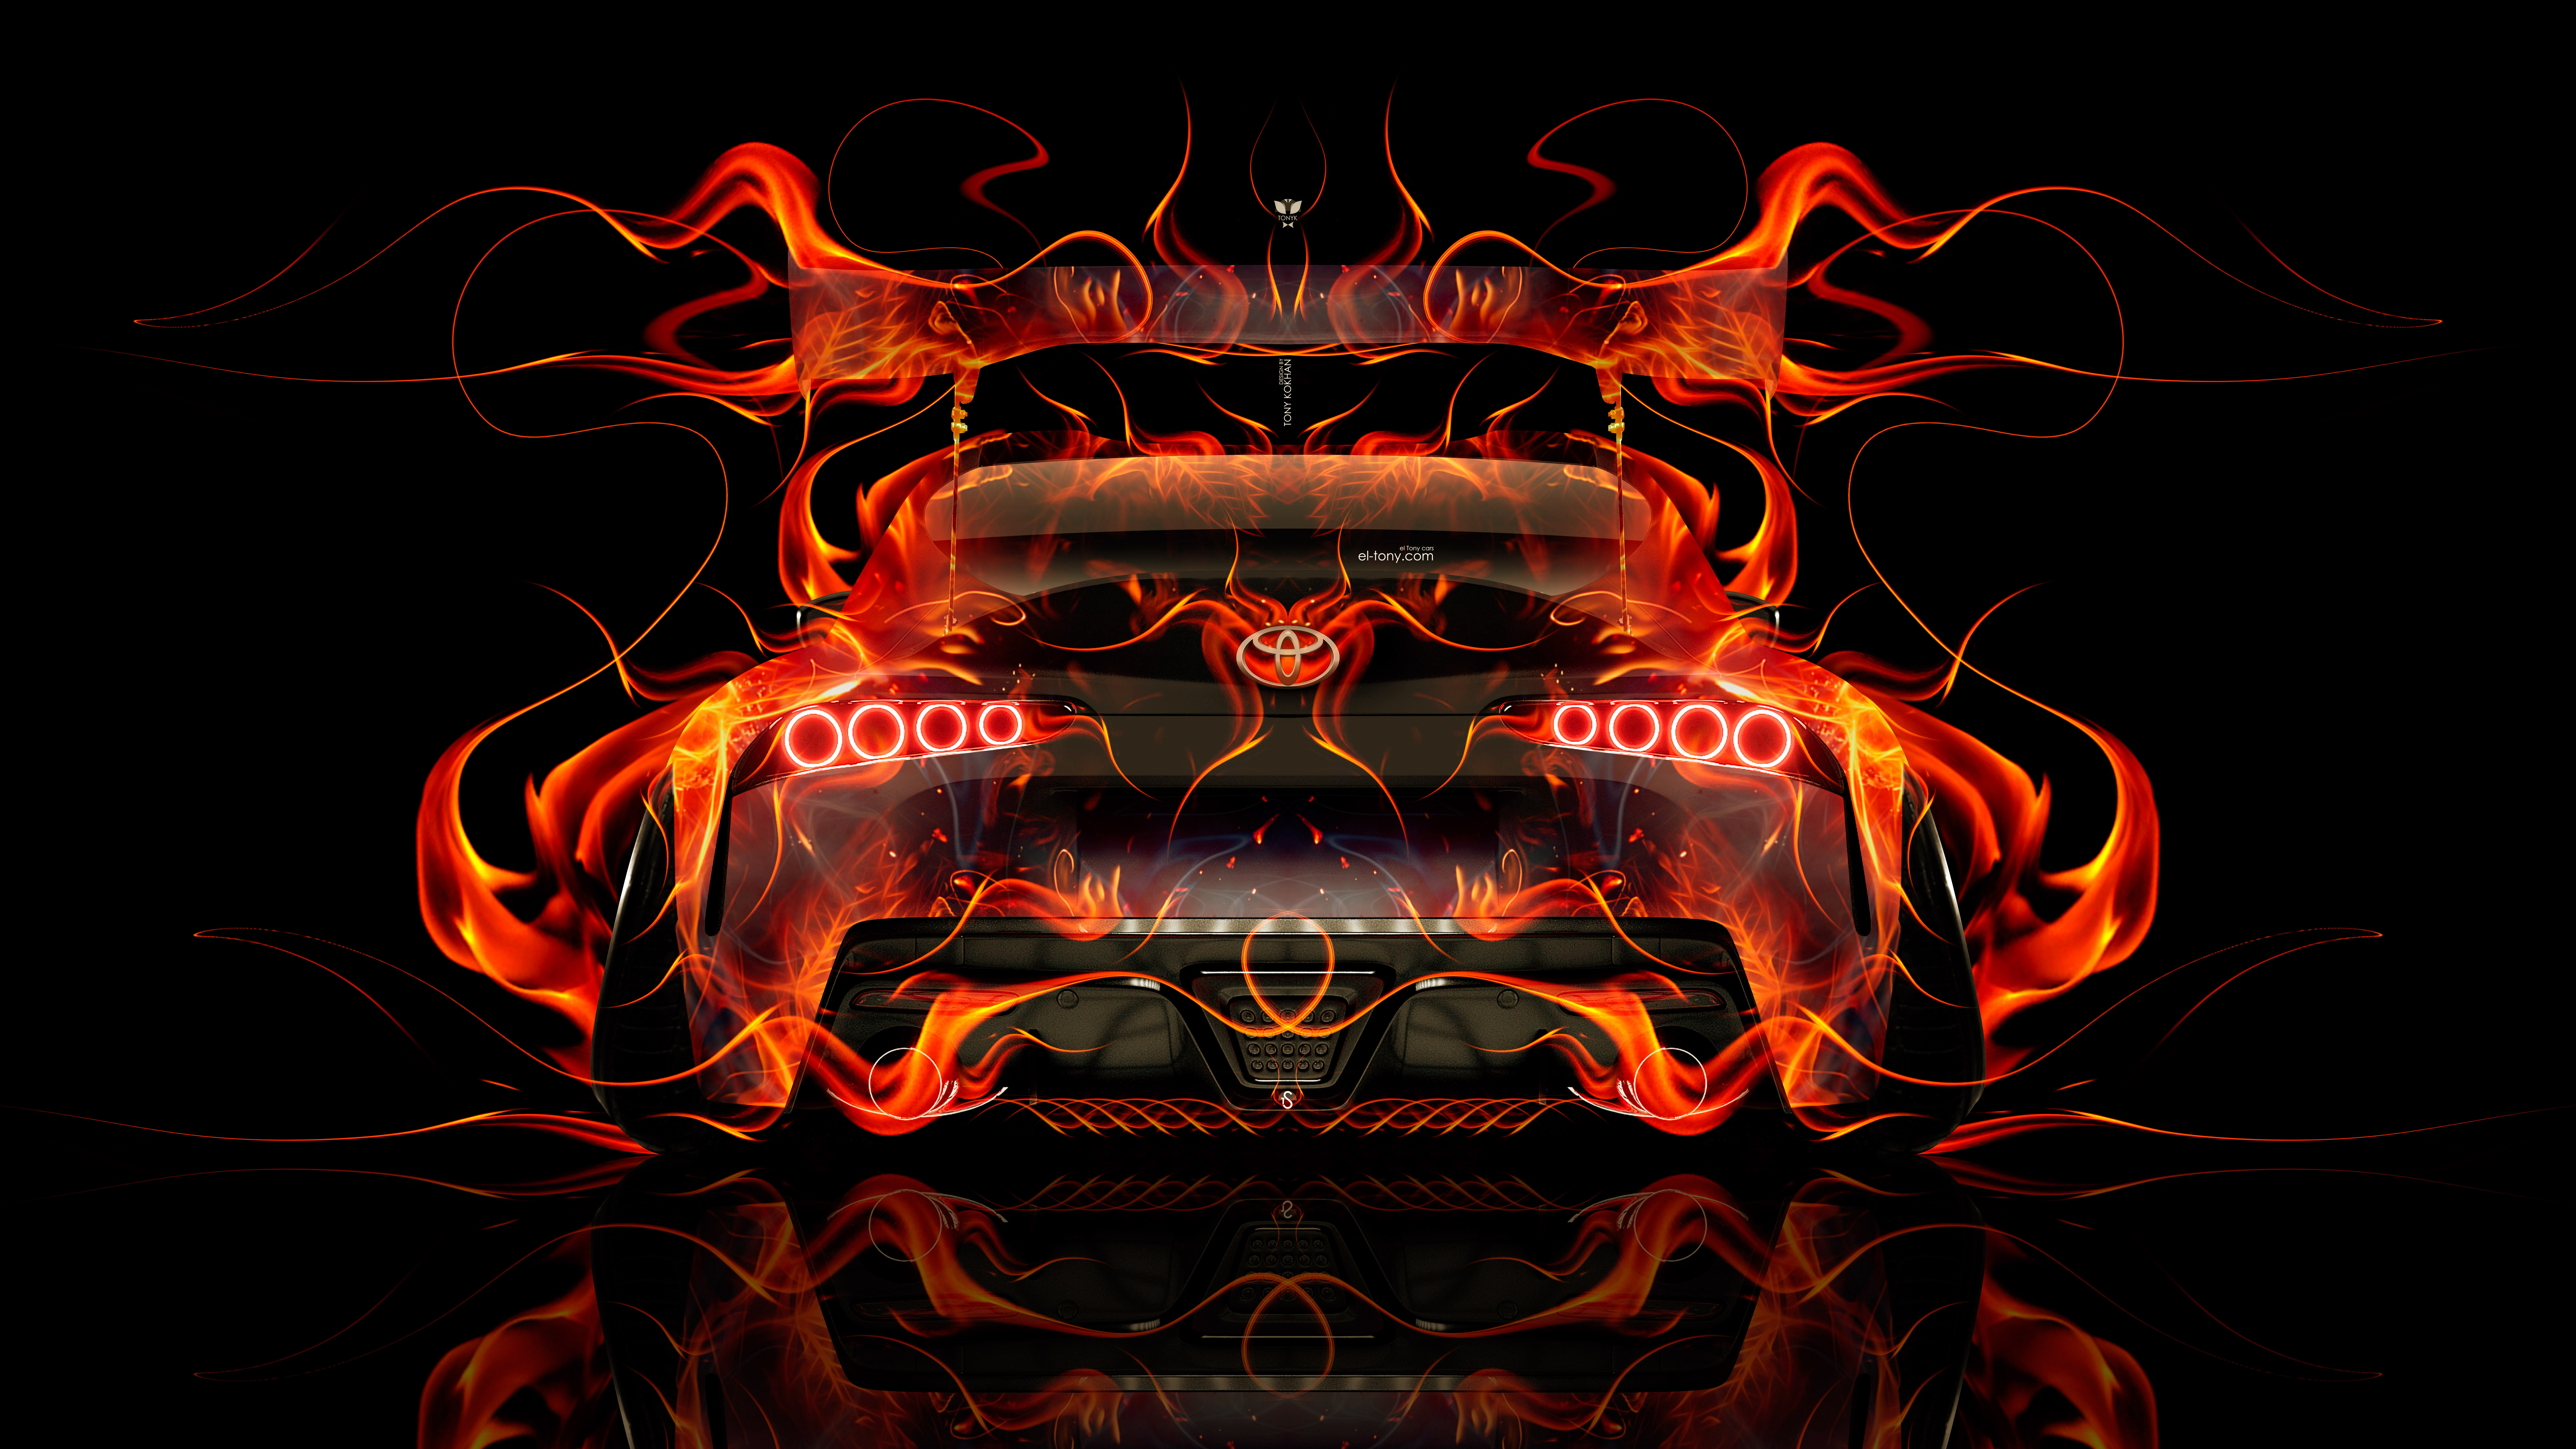 Toyota-Supra-A90-JDM-Tuning-Back-Super-Fire-Flame-Abstract-Art-Car